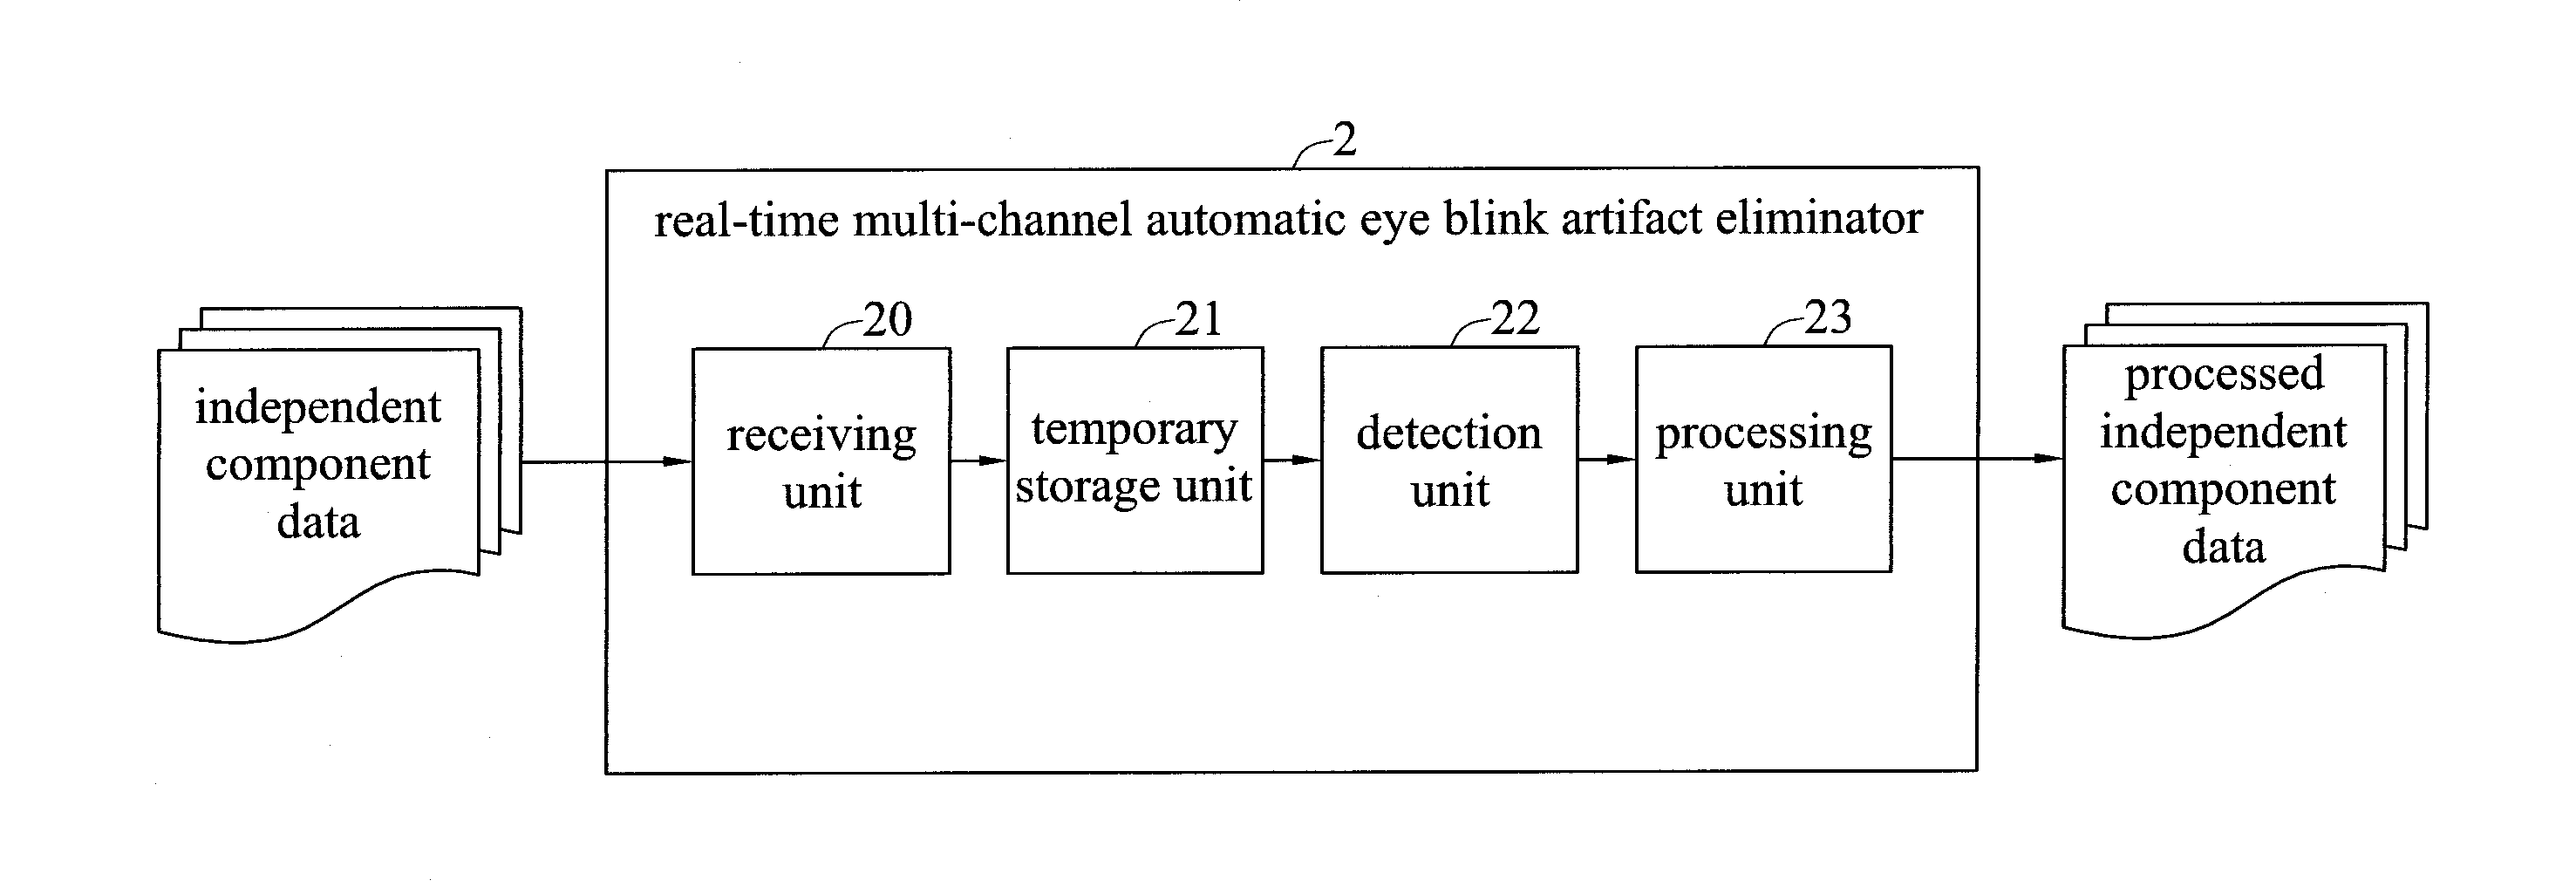 Real-time multi-channel automatic eye blink artifact eliminator